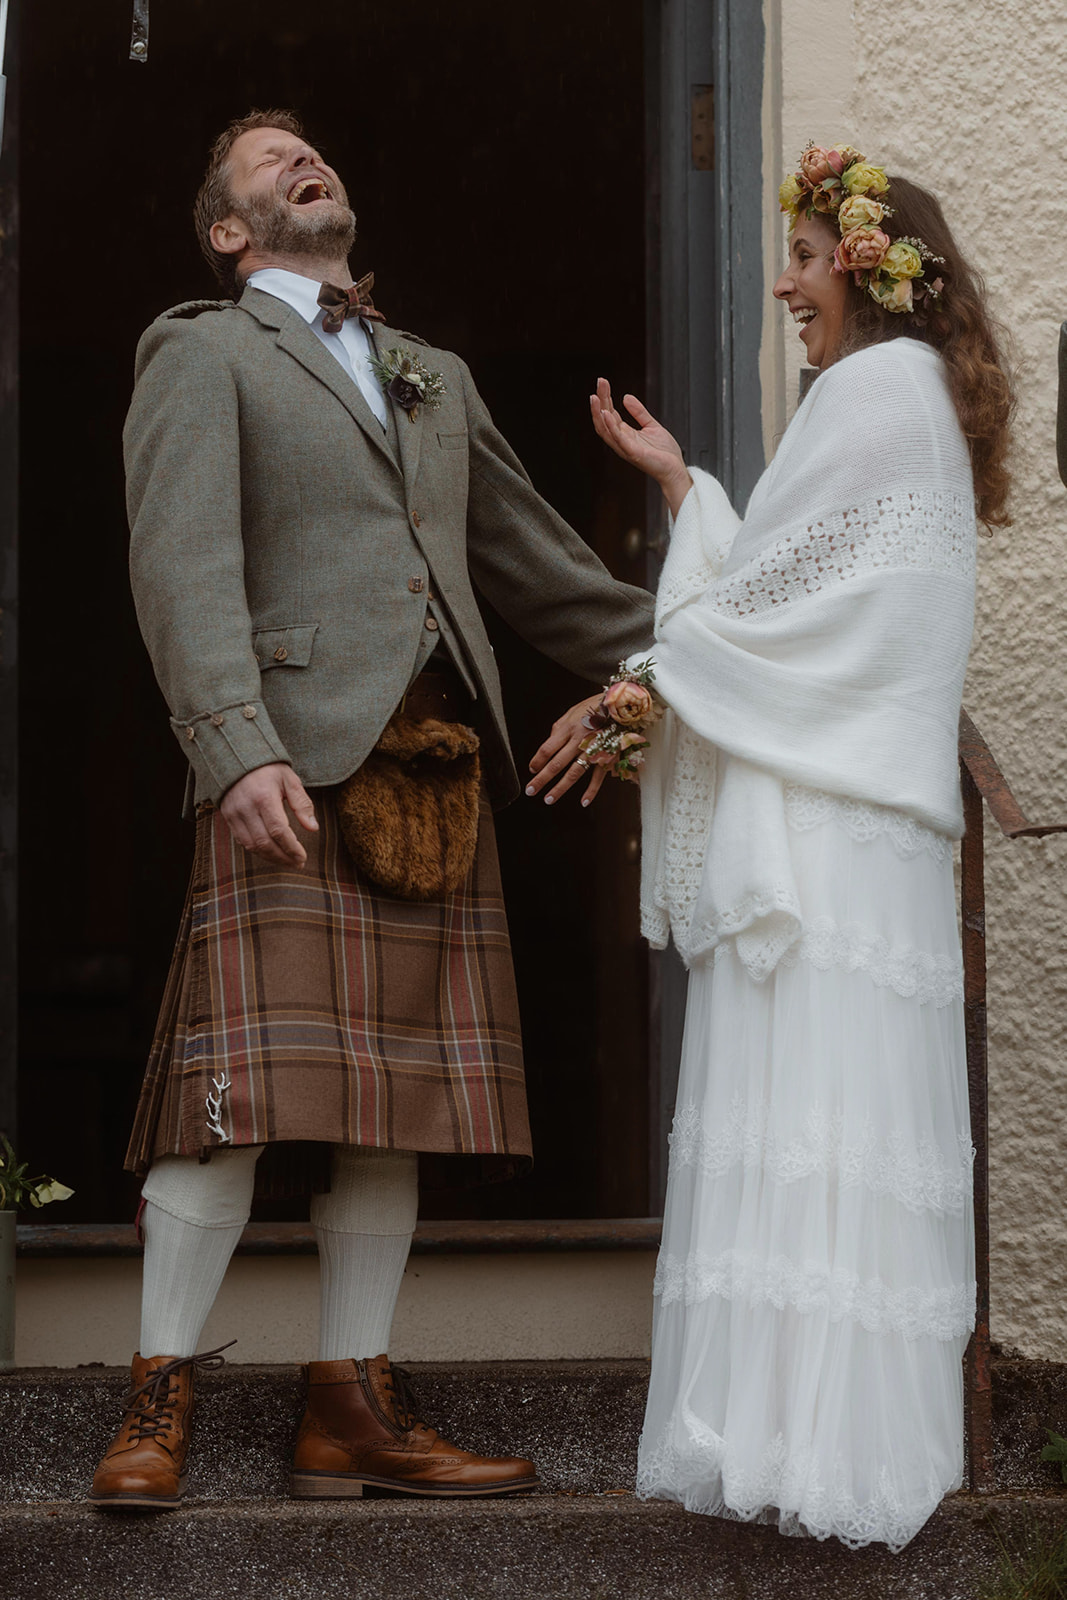 Rebecca and Simon shared a romantic moment during their Isle of Skye elopement ceremony.